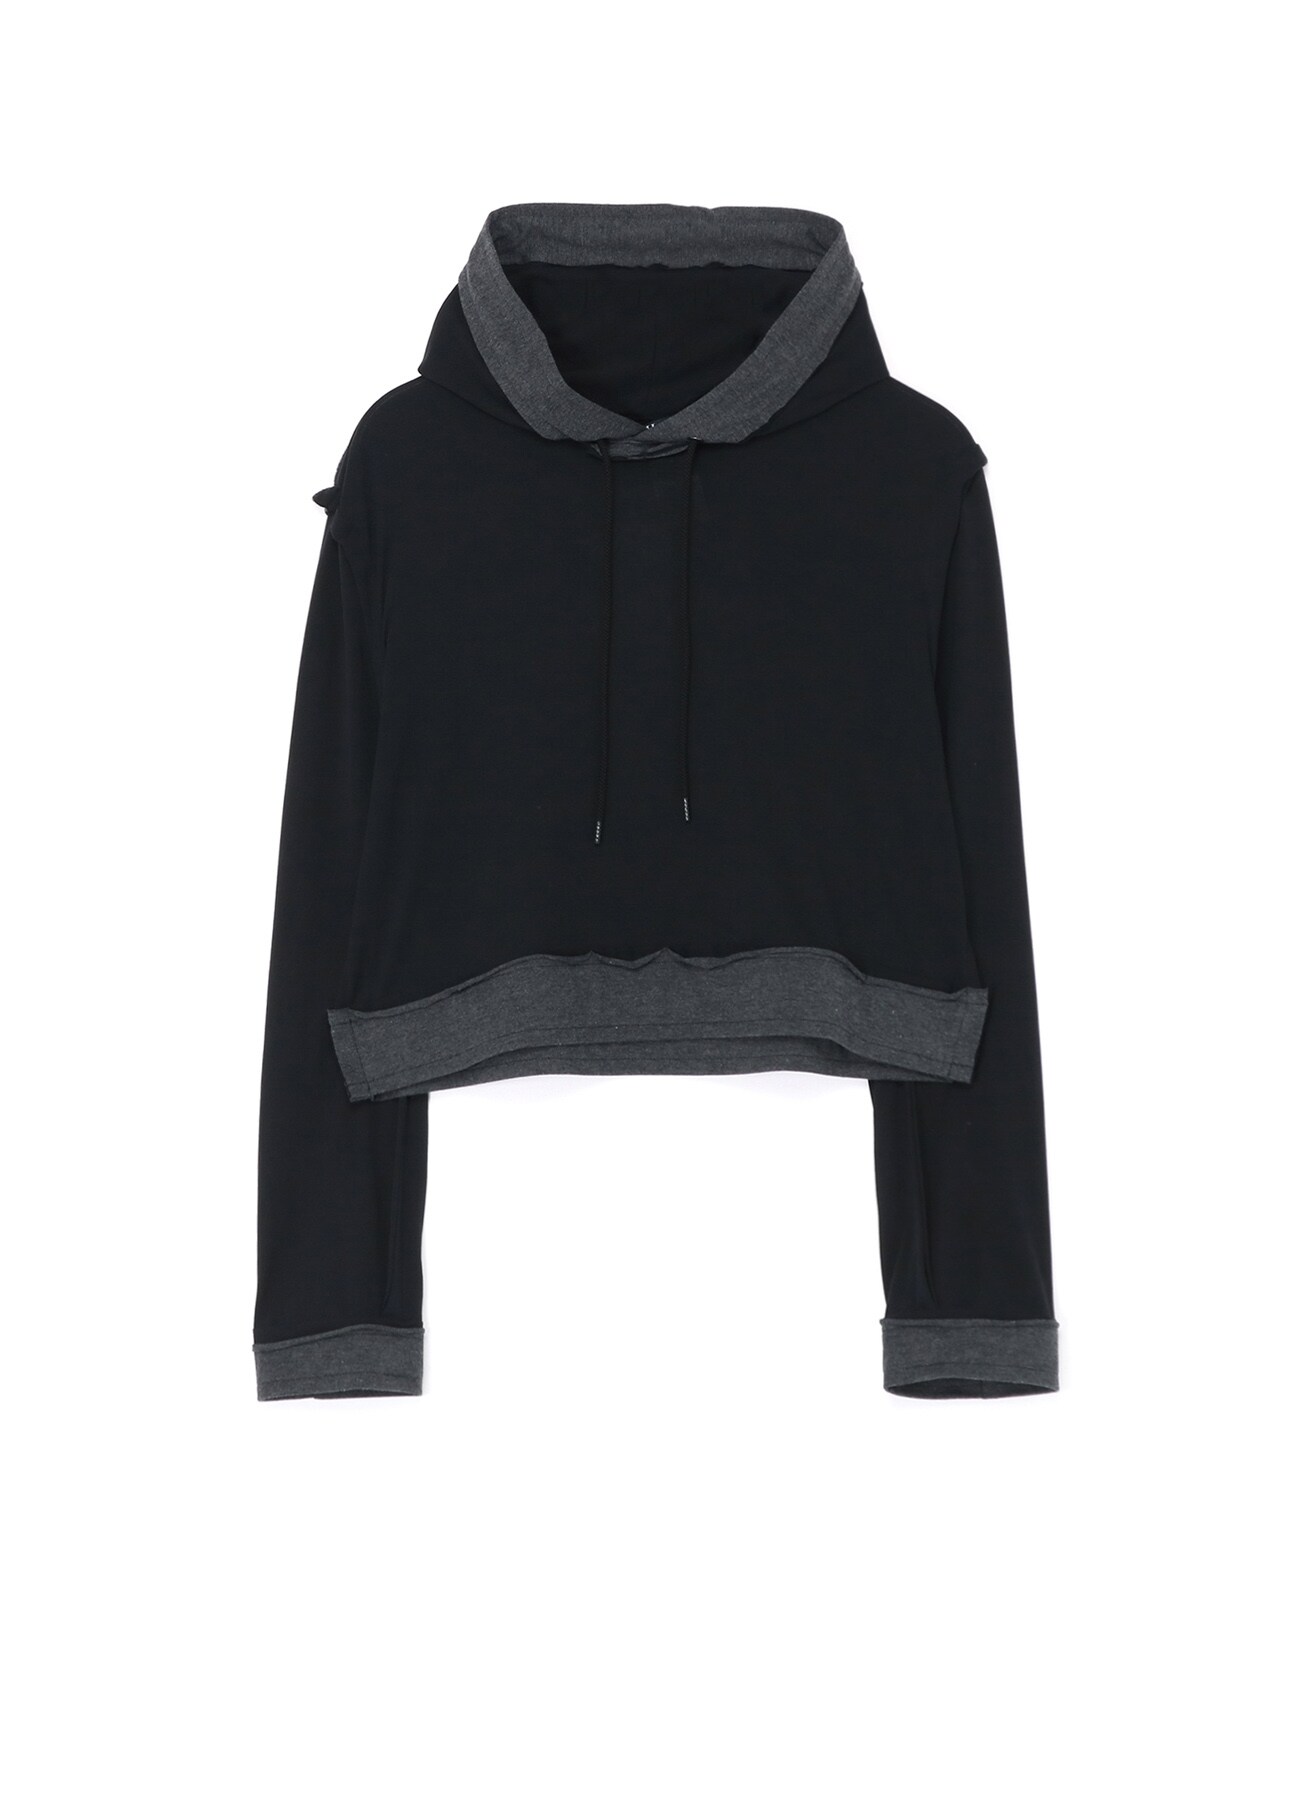 100/2 COTTON JERSEY DECONSTRUCTED PULLOVER HOODIE(S Black): LIMI